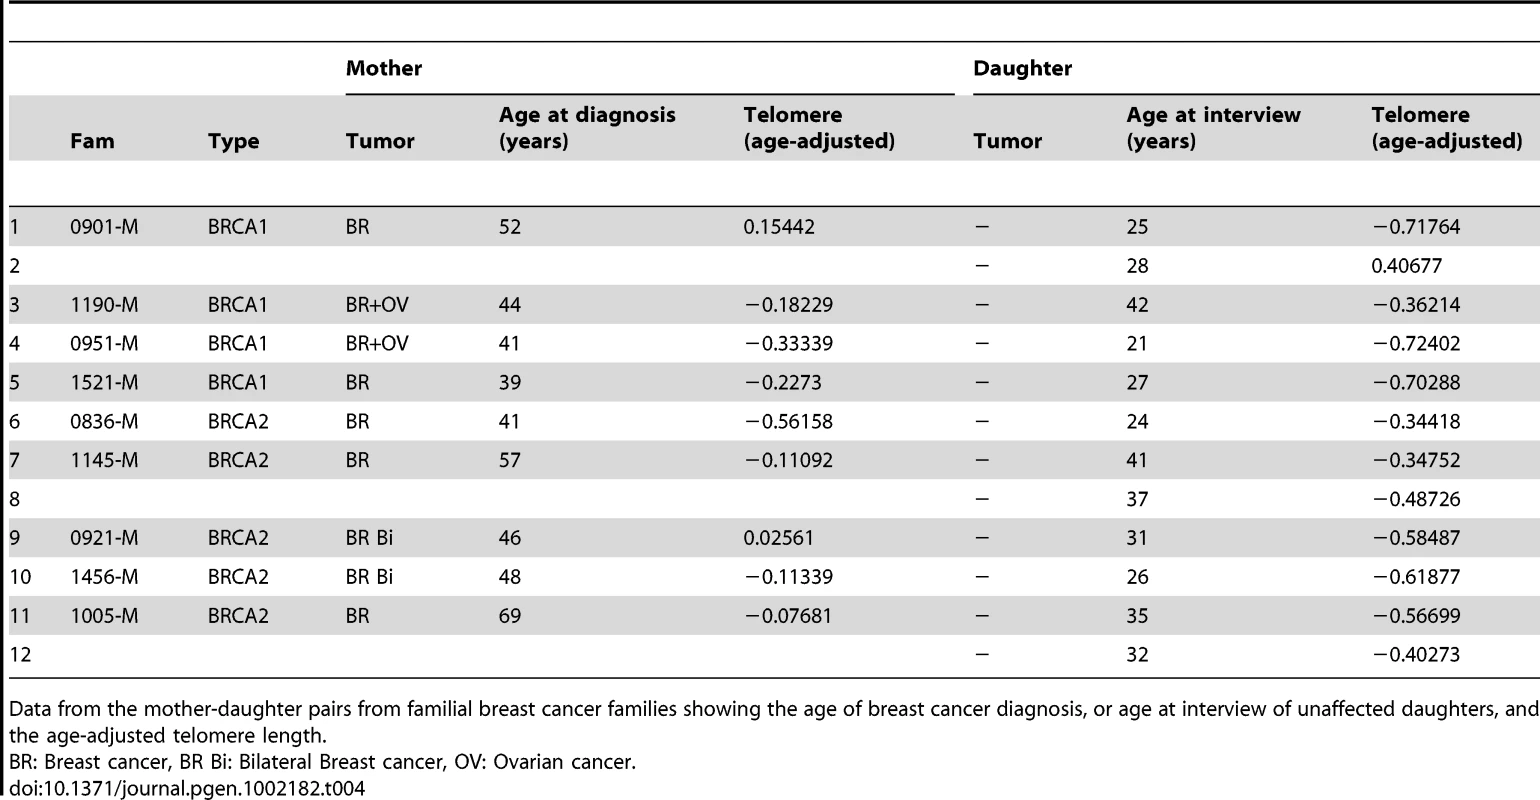 Age-adjusted telomere length in mother-daughter pairs with unaffected BRCA1/2 carrier daughters.